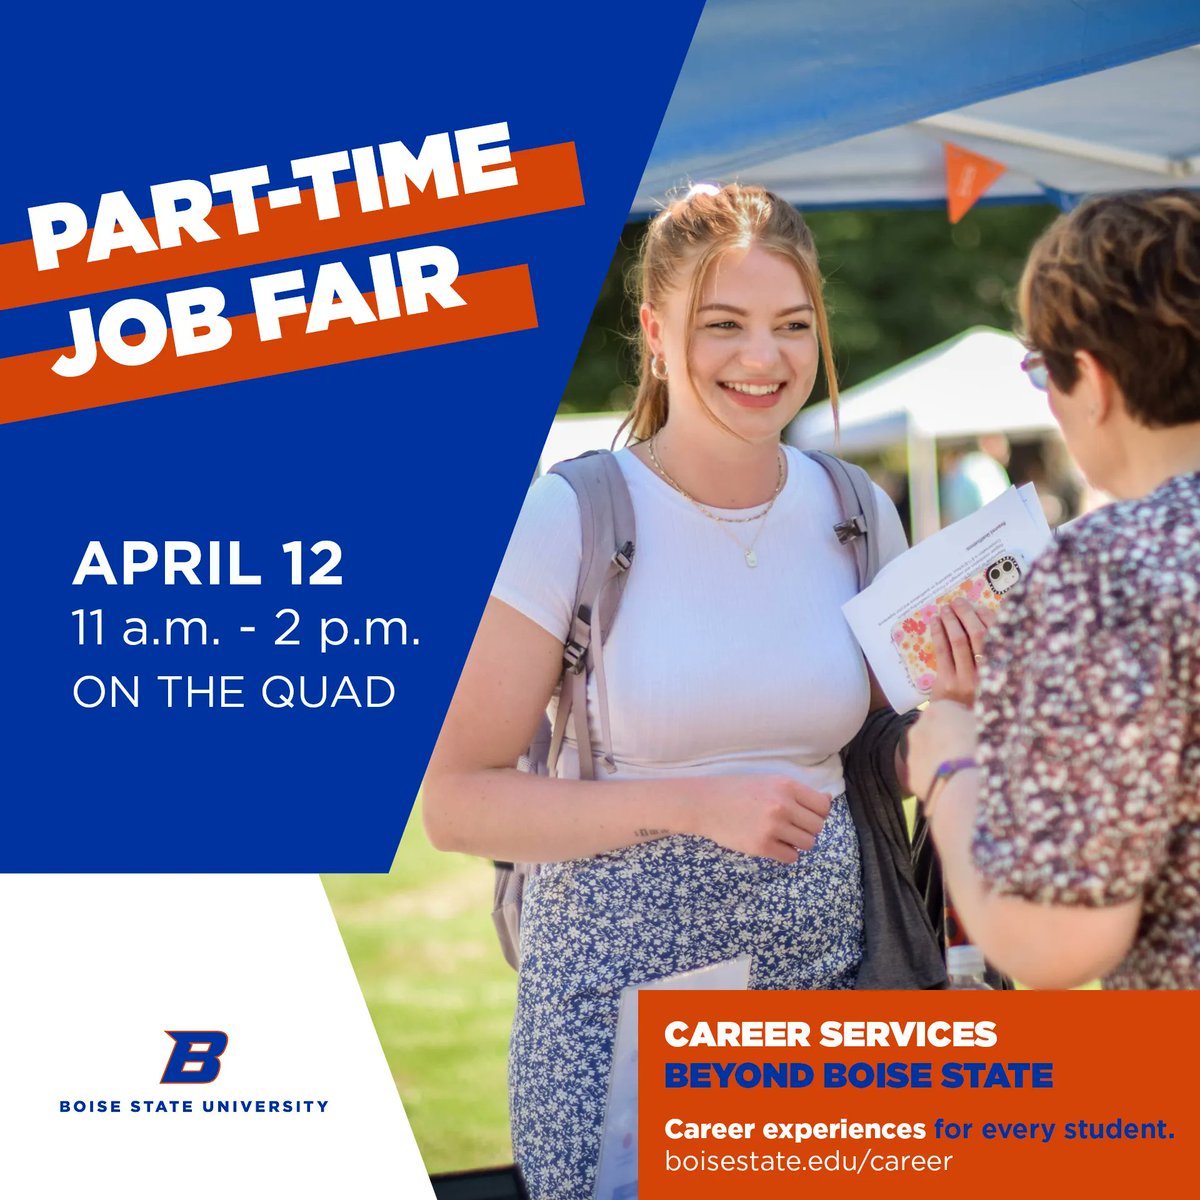 If your summer plans involve getting a job, make sure to stop by the quad on April 12 from 11-2 for the Part-Time and Summer Job Fair. See who's coming at: buff.ly/3UcUNpc #BeyondBoiseState #PartTimeJobFair